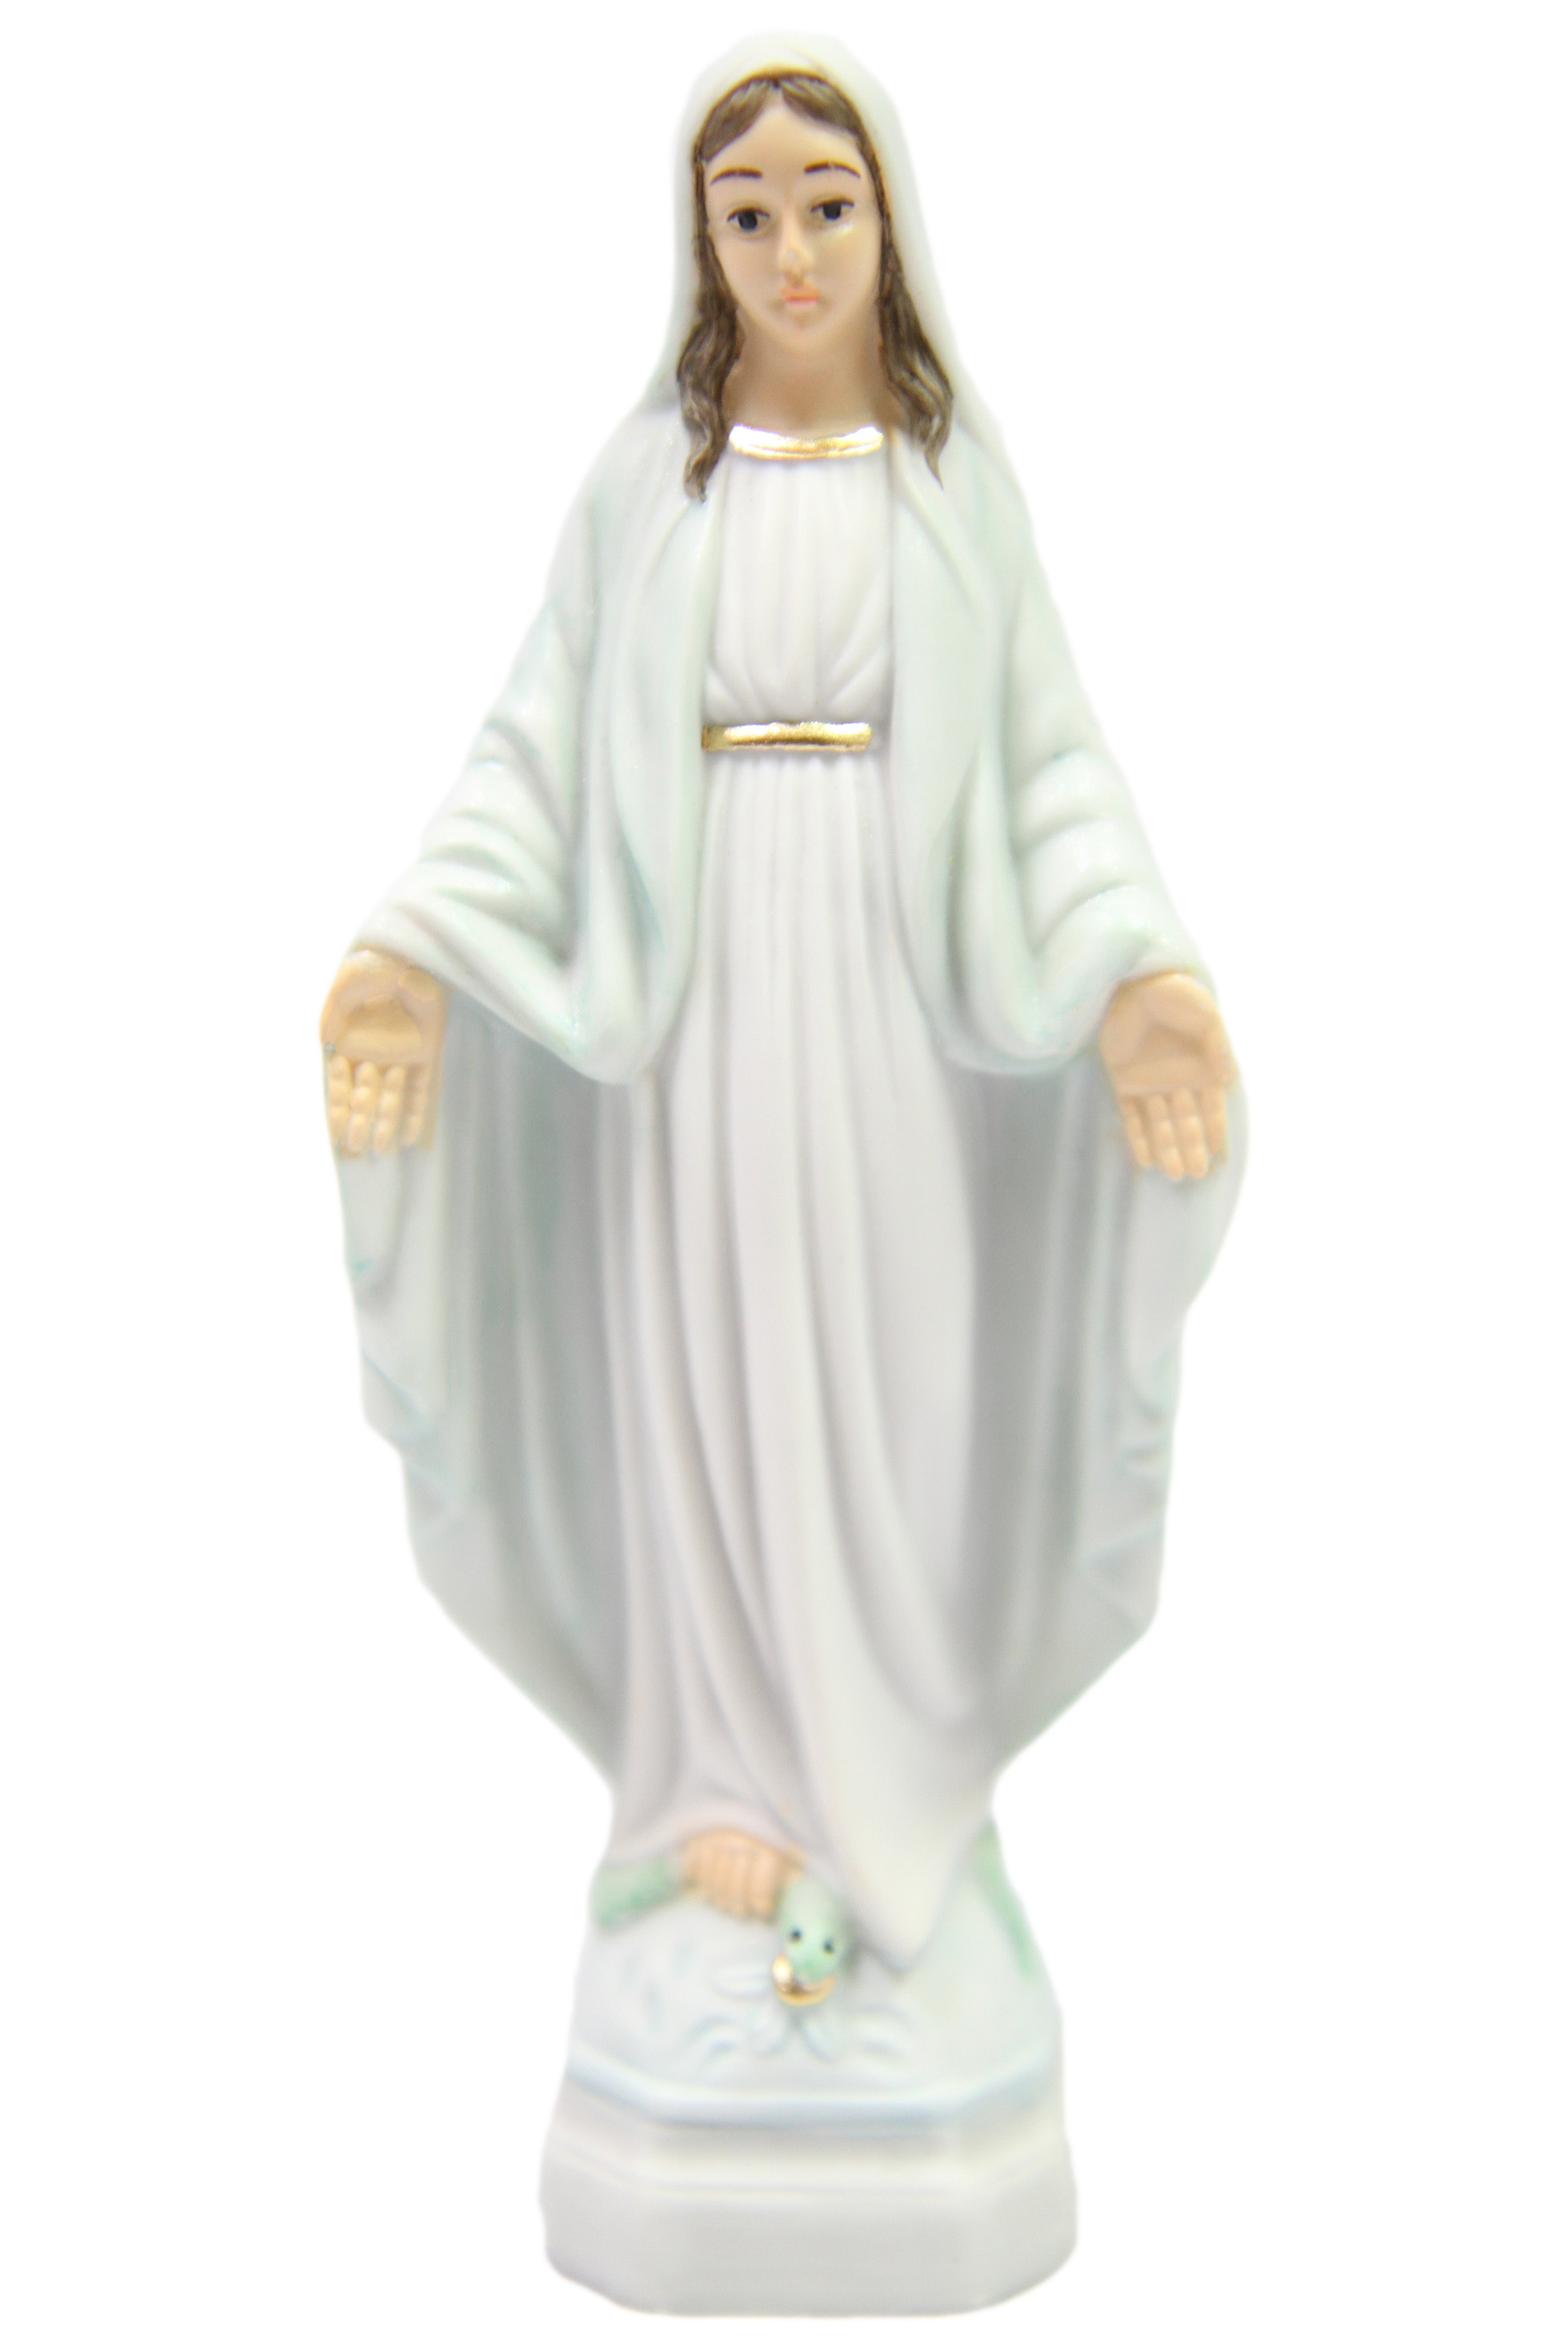 6 Inch Our Lady of Grace Virgin Mary Catholic Statue Vittoria Collection Made in Italy